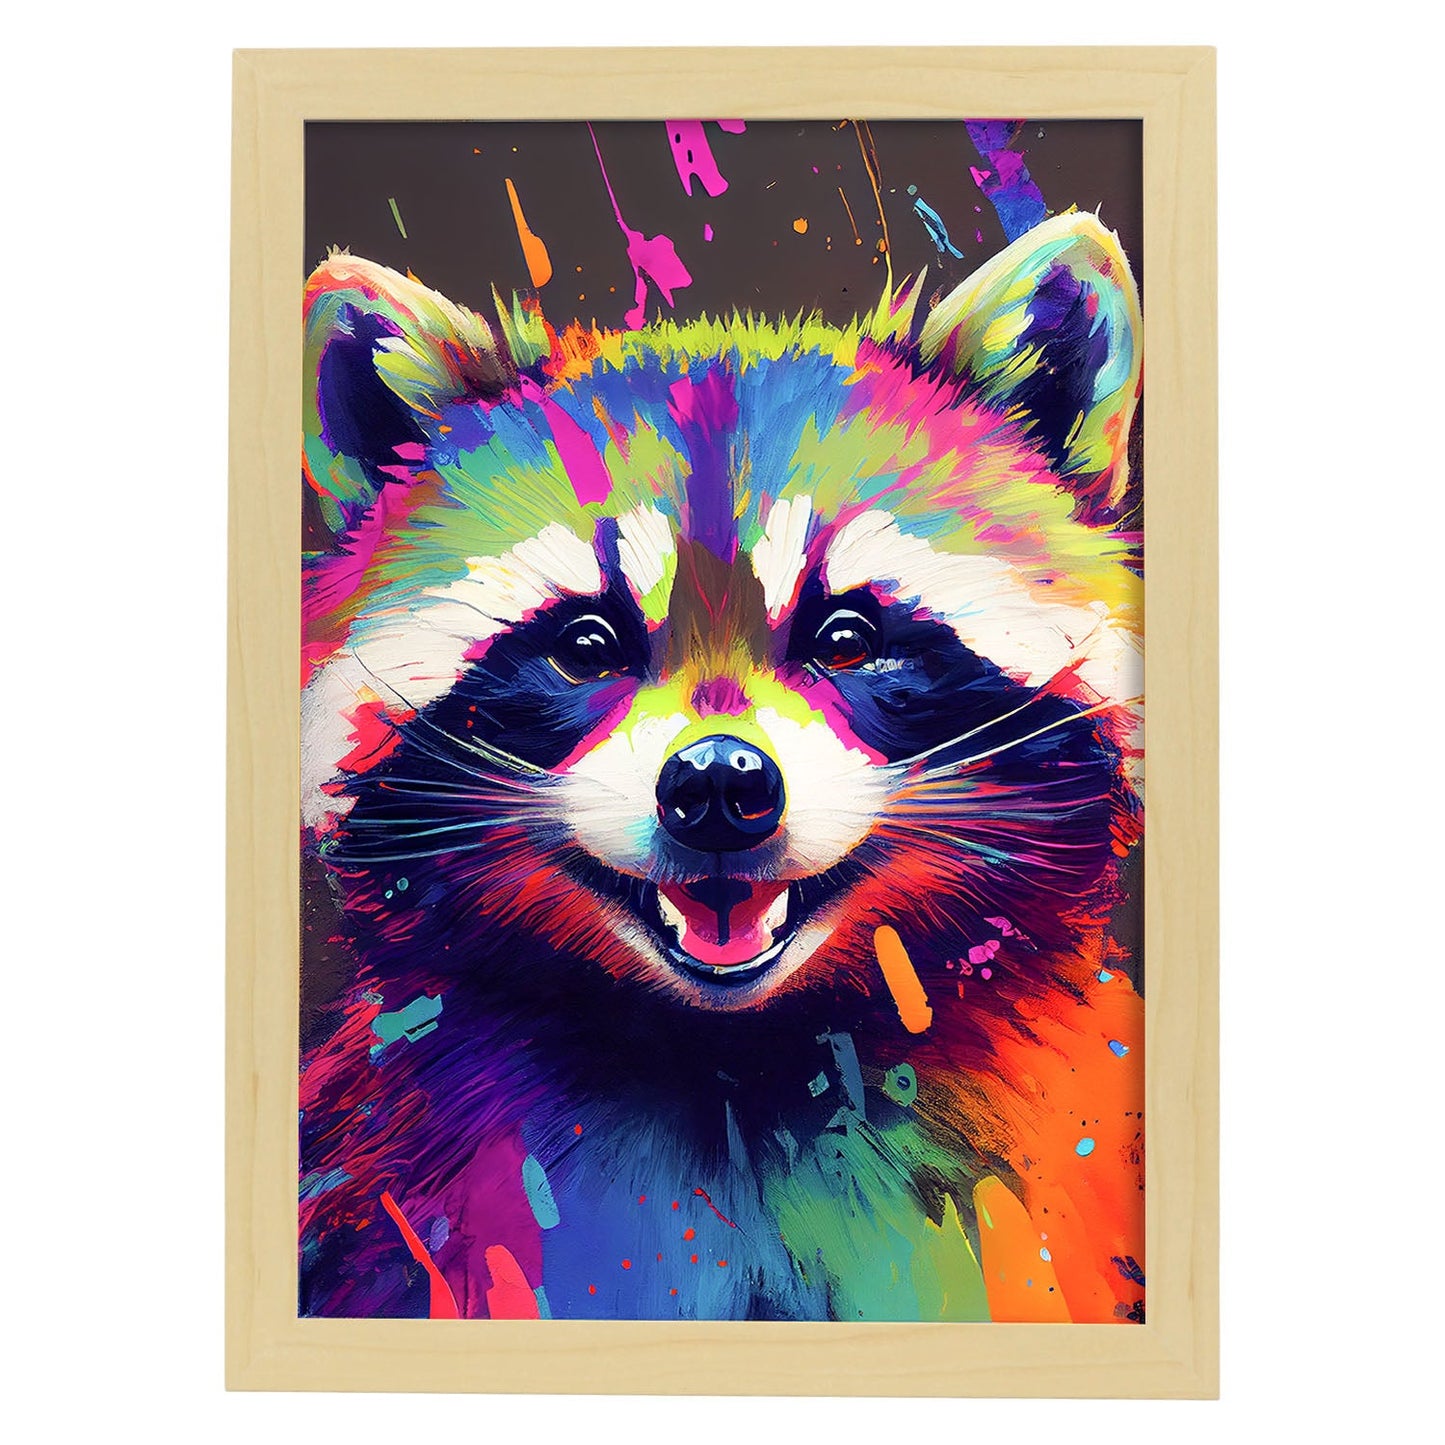 Nacnic Abstract smiling Raccoon in Lisa Fran Style. Aesthetic Wall Art Prints for Bedroom or Living Room Design.